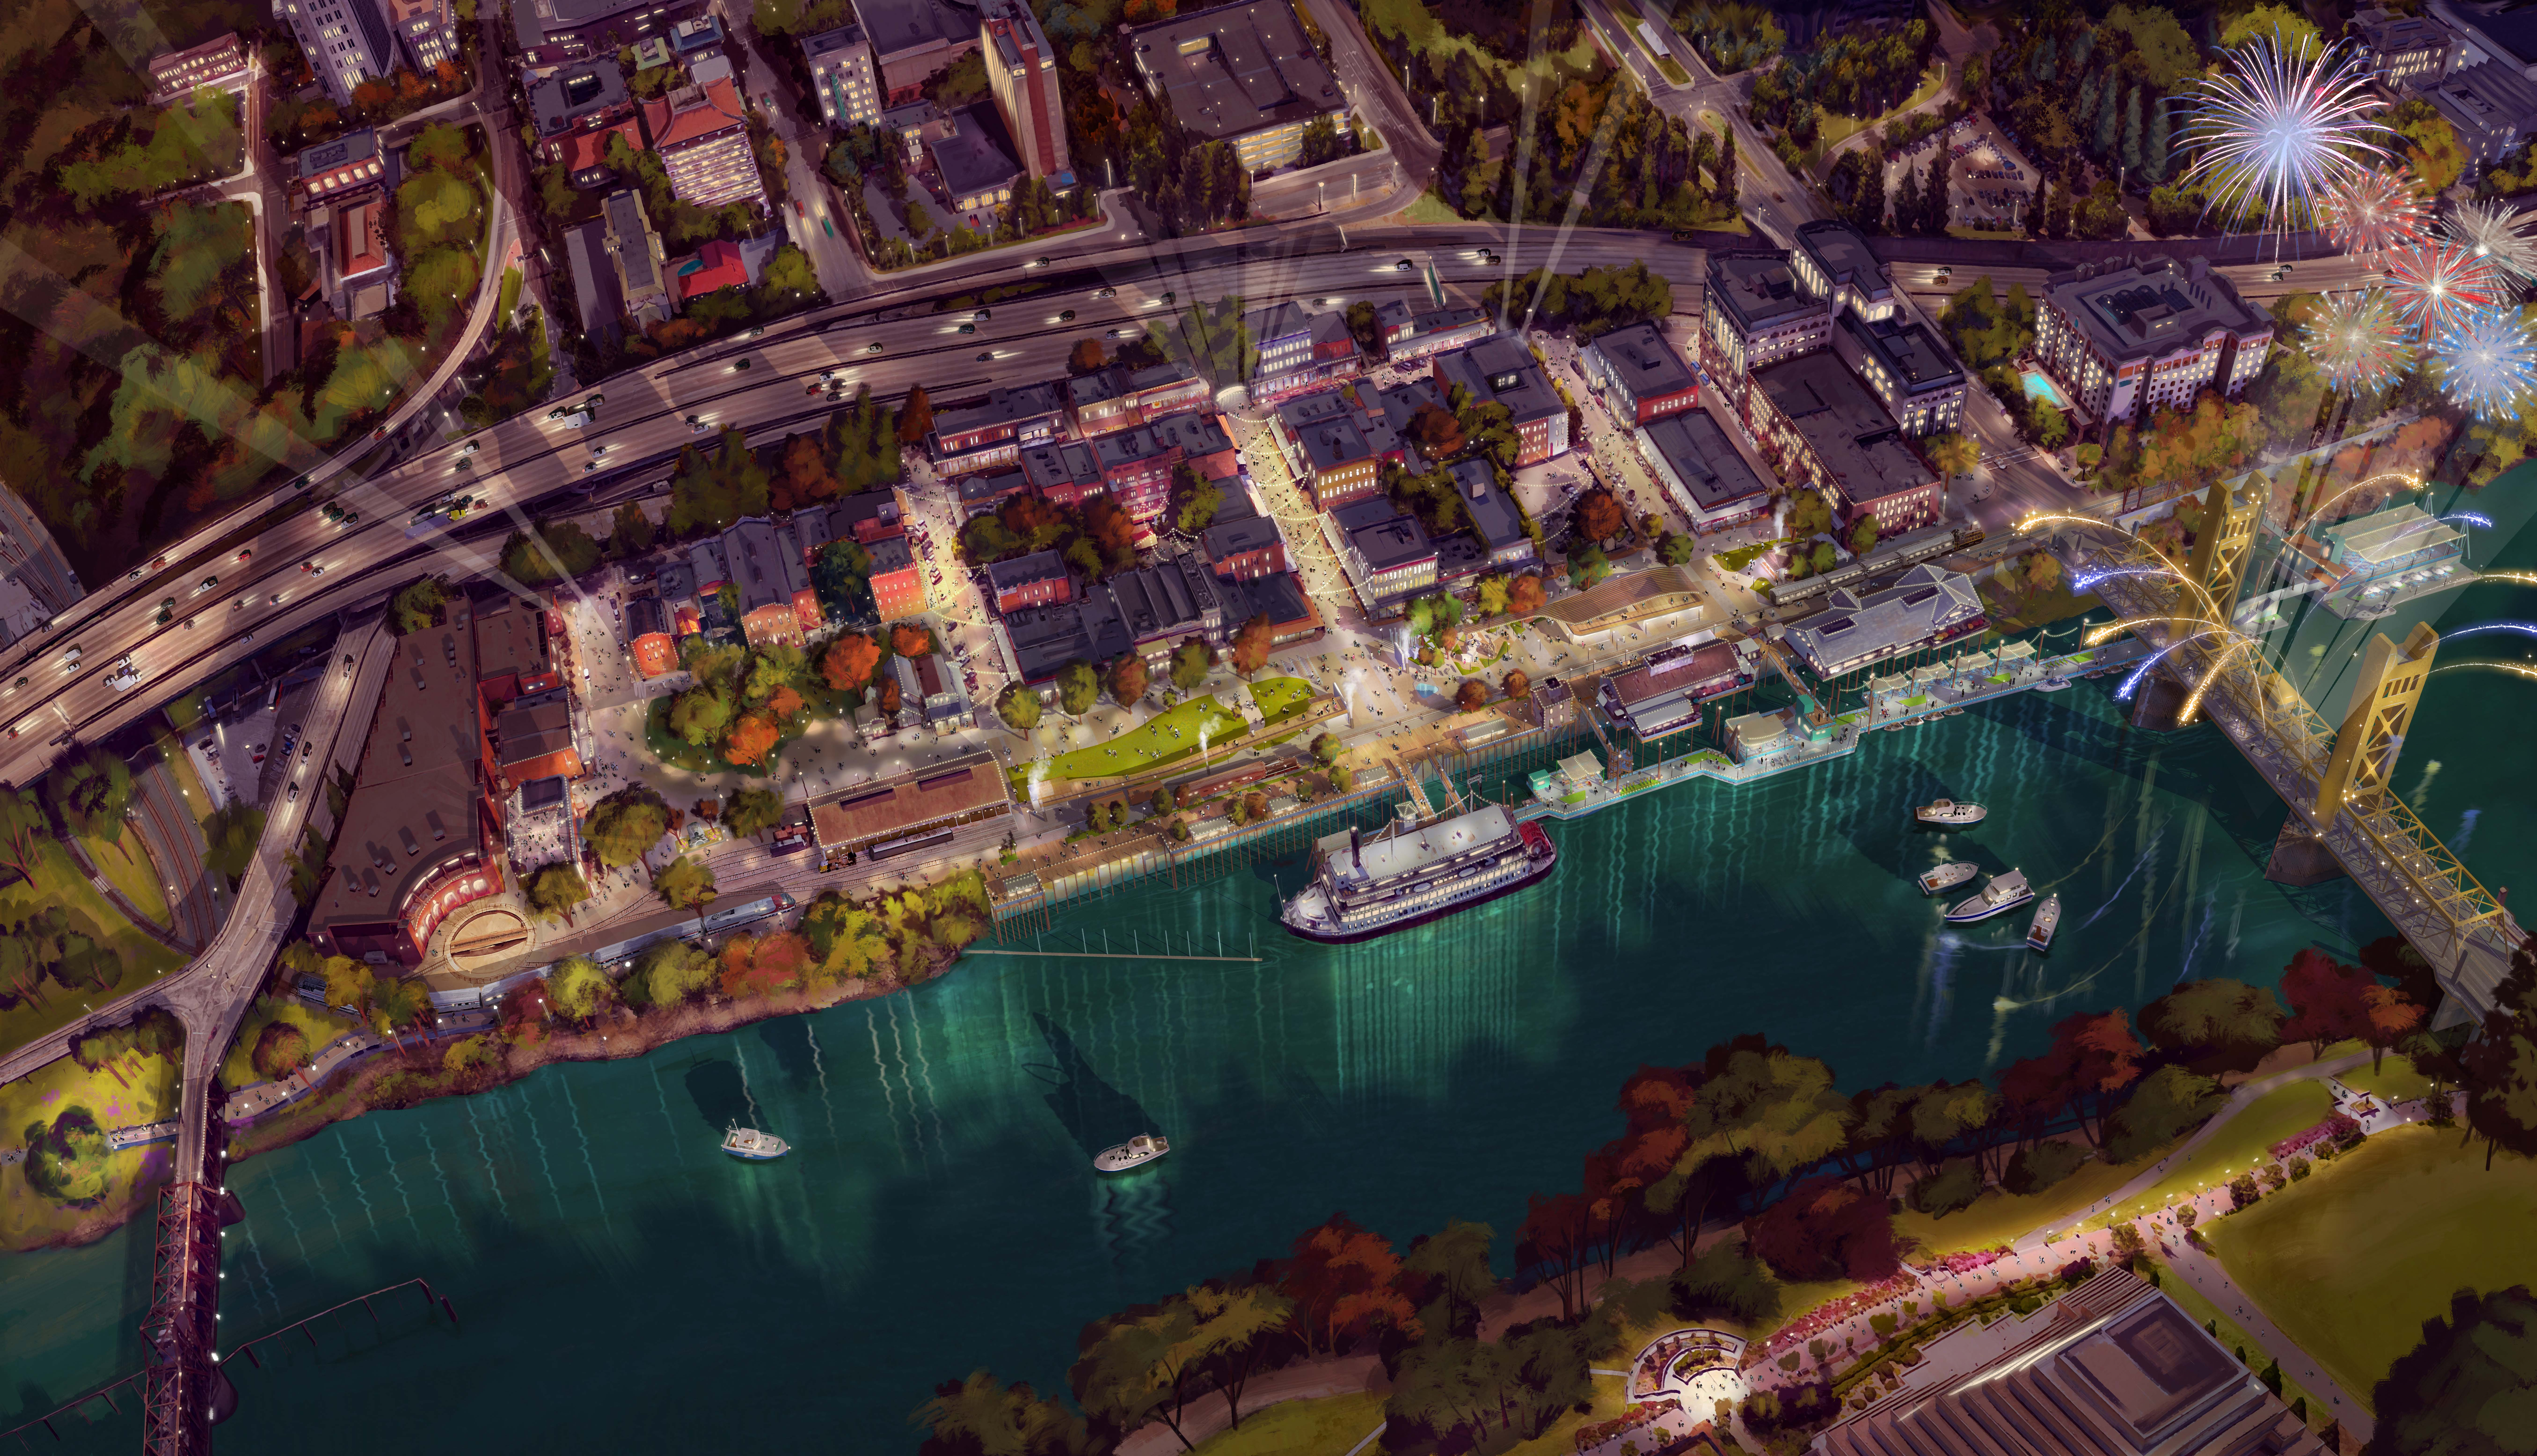 A concept image of the Old Sacramento Waterfront